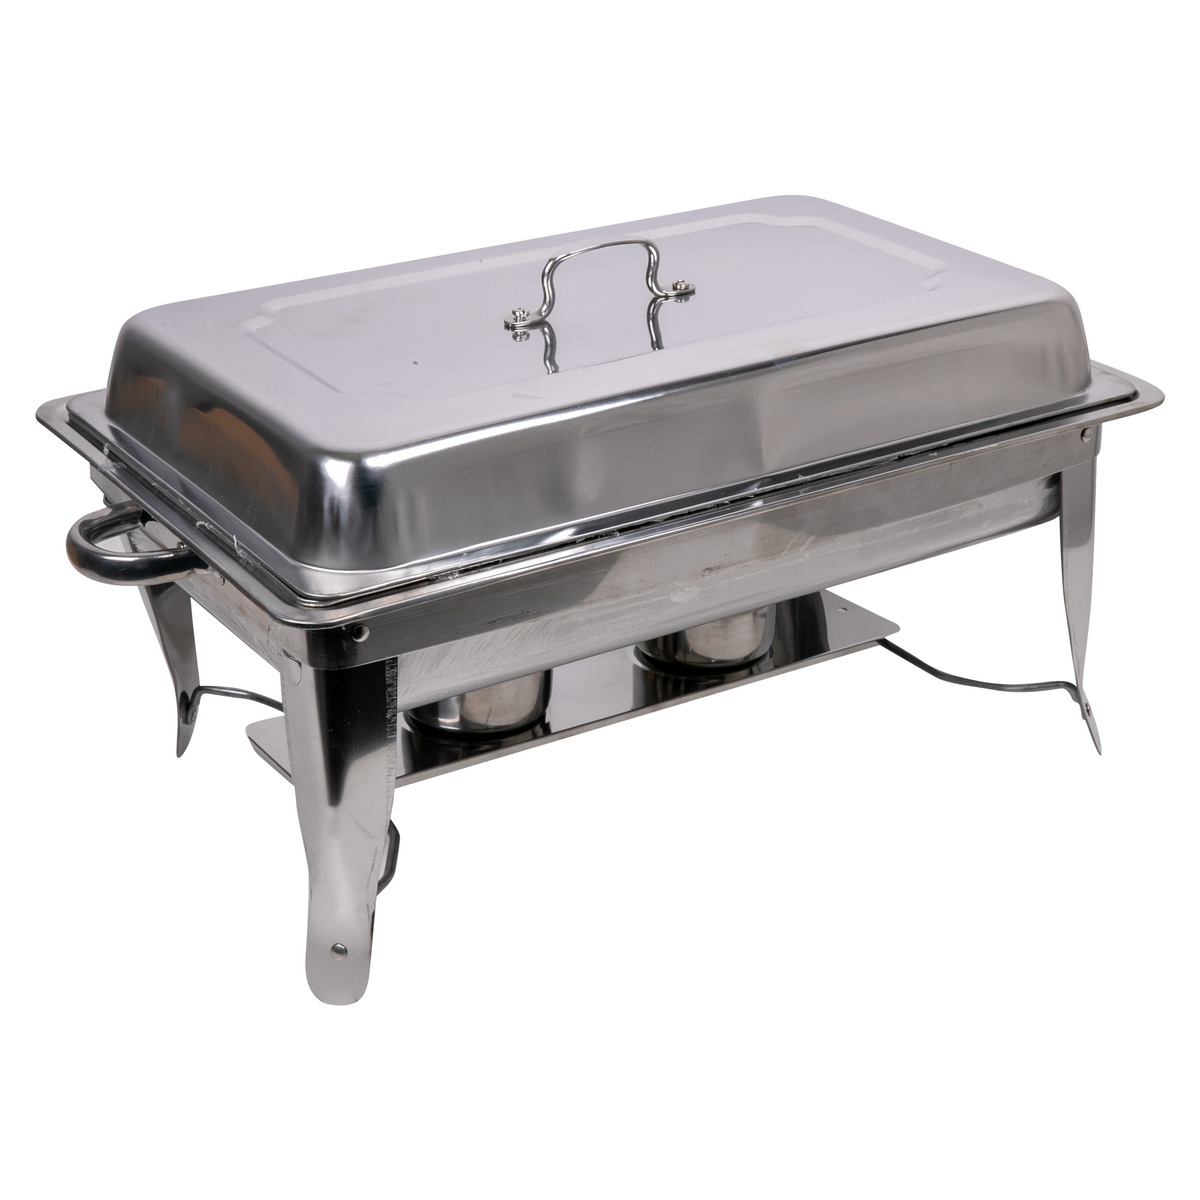 Chefline Stainless Steel Chafing Dish 2 Compartment 8LMKT 8Ltr